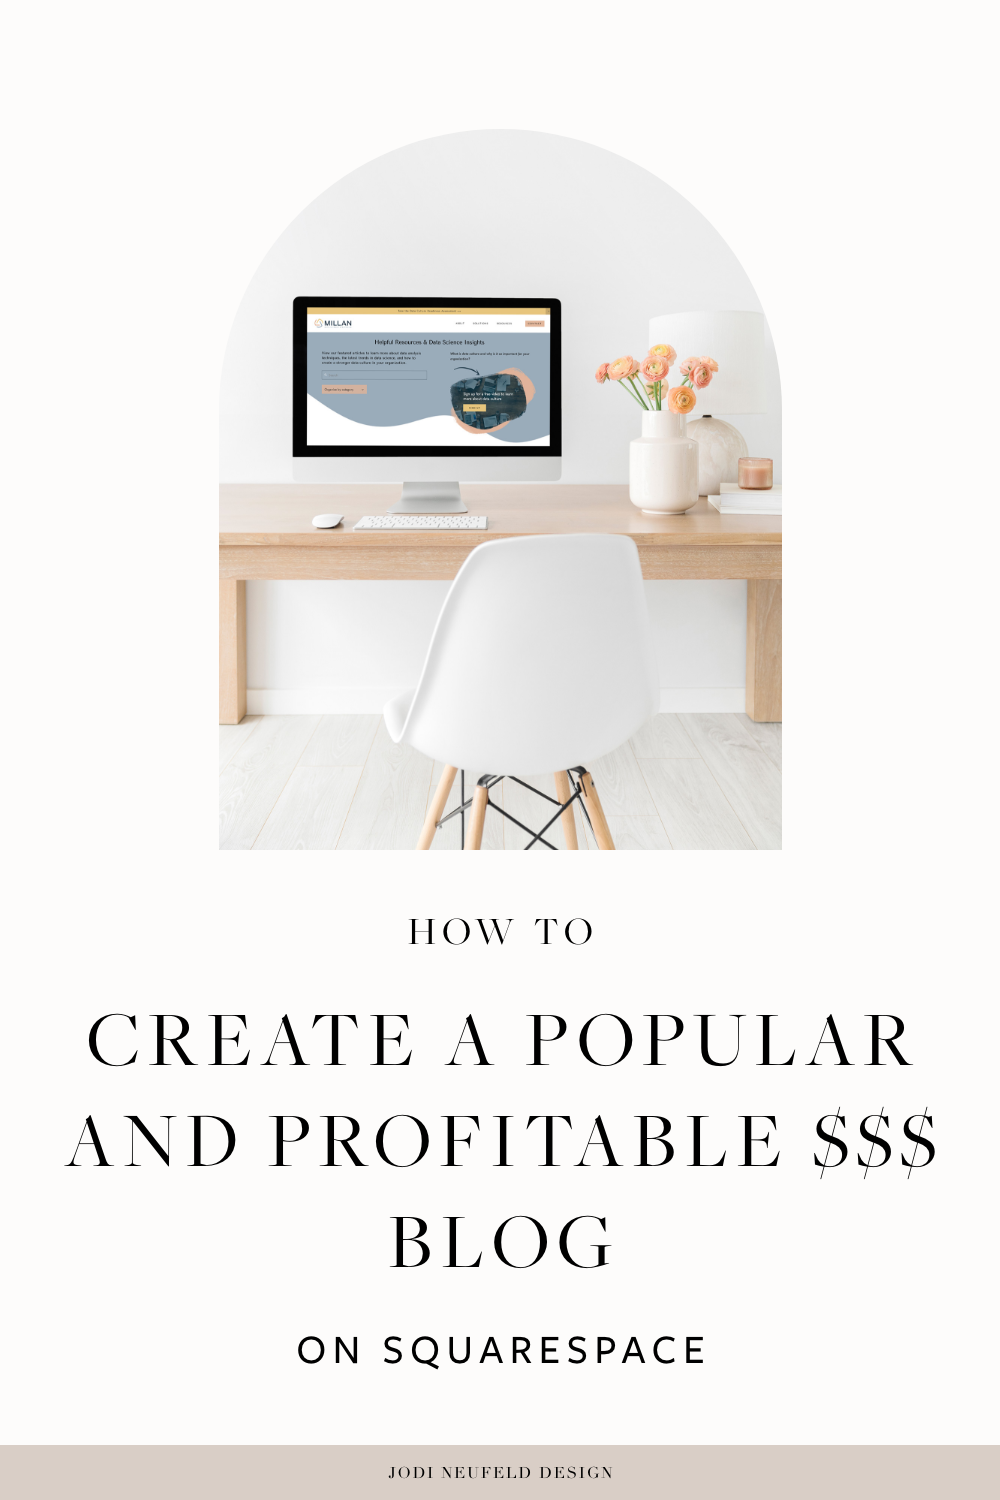 How to create a profitable blog on Squarespace | pin graphic 7 | Jodi Neufeld Design.png